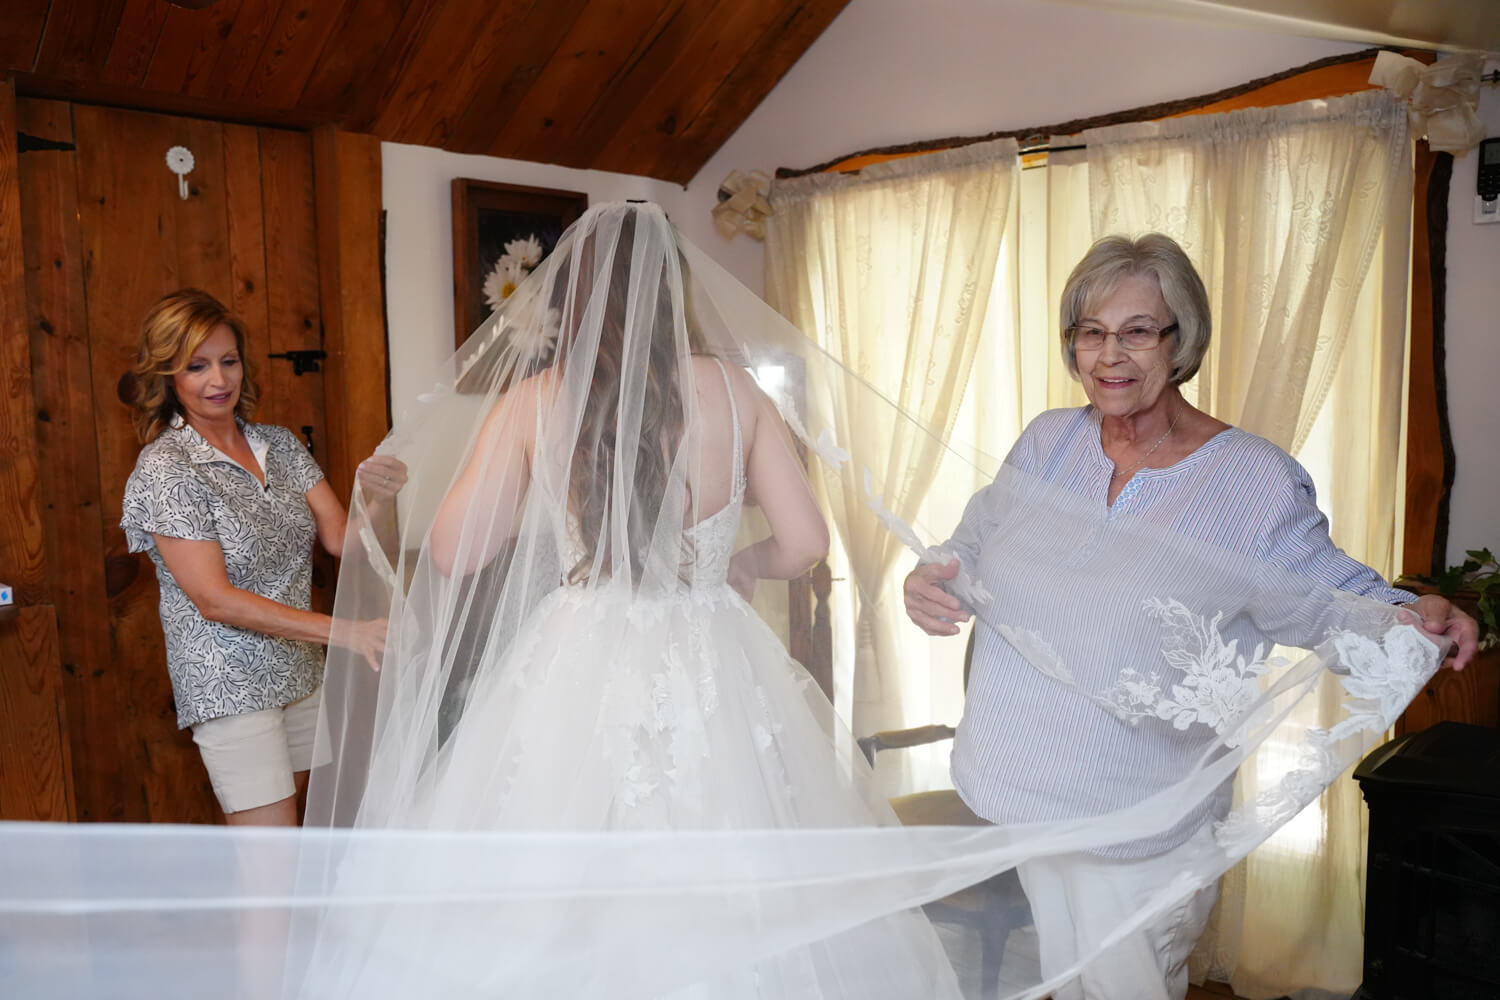 Grandmother fixing a bride's veil in the dressing area of a barn wedding venue in Pigeon Forge